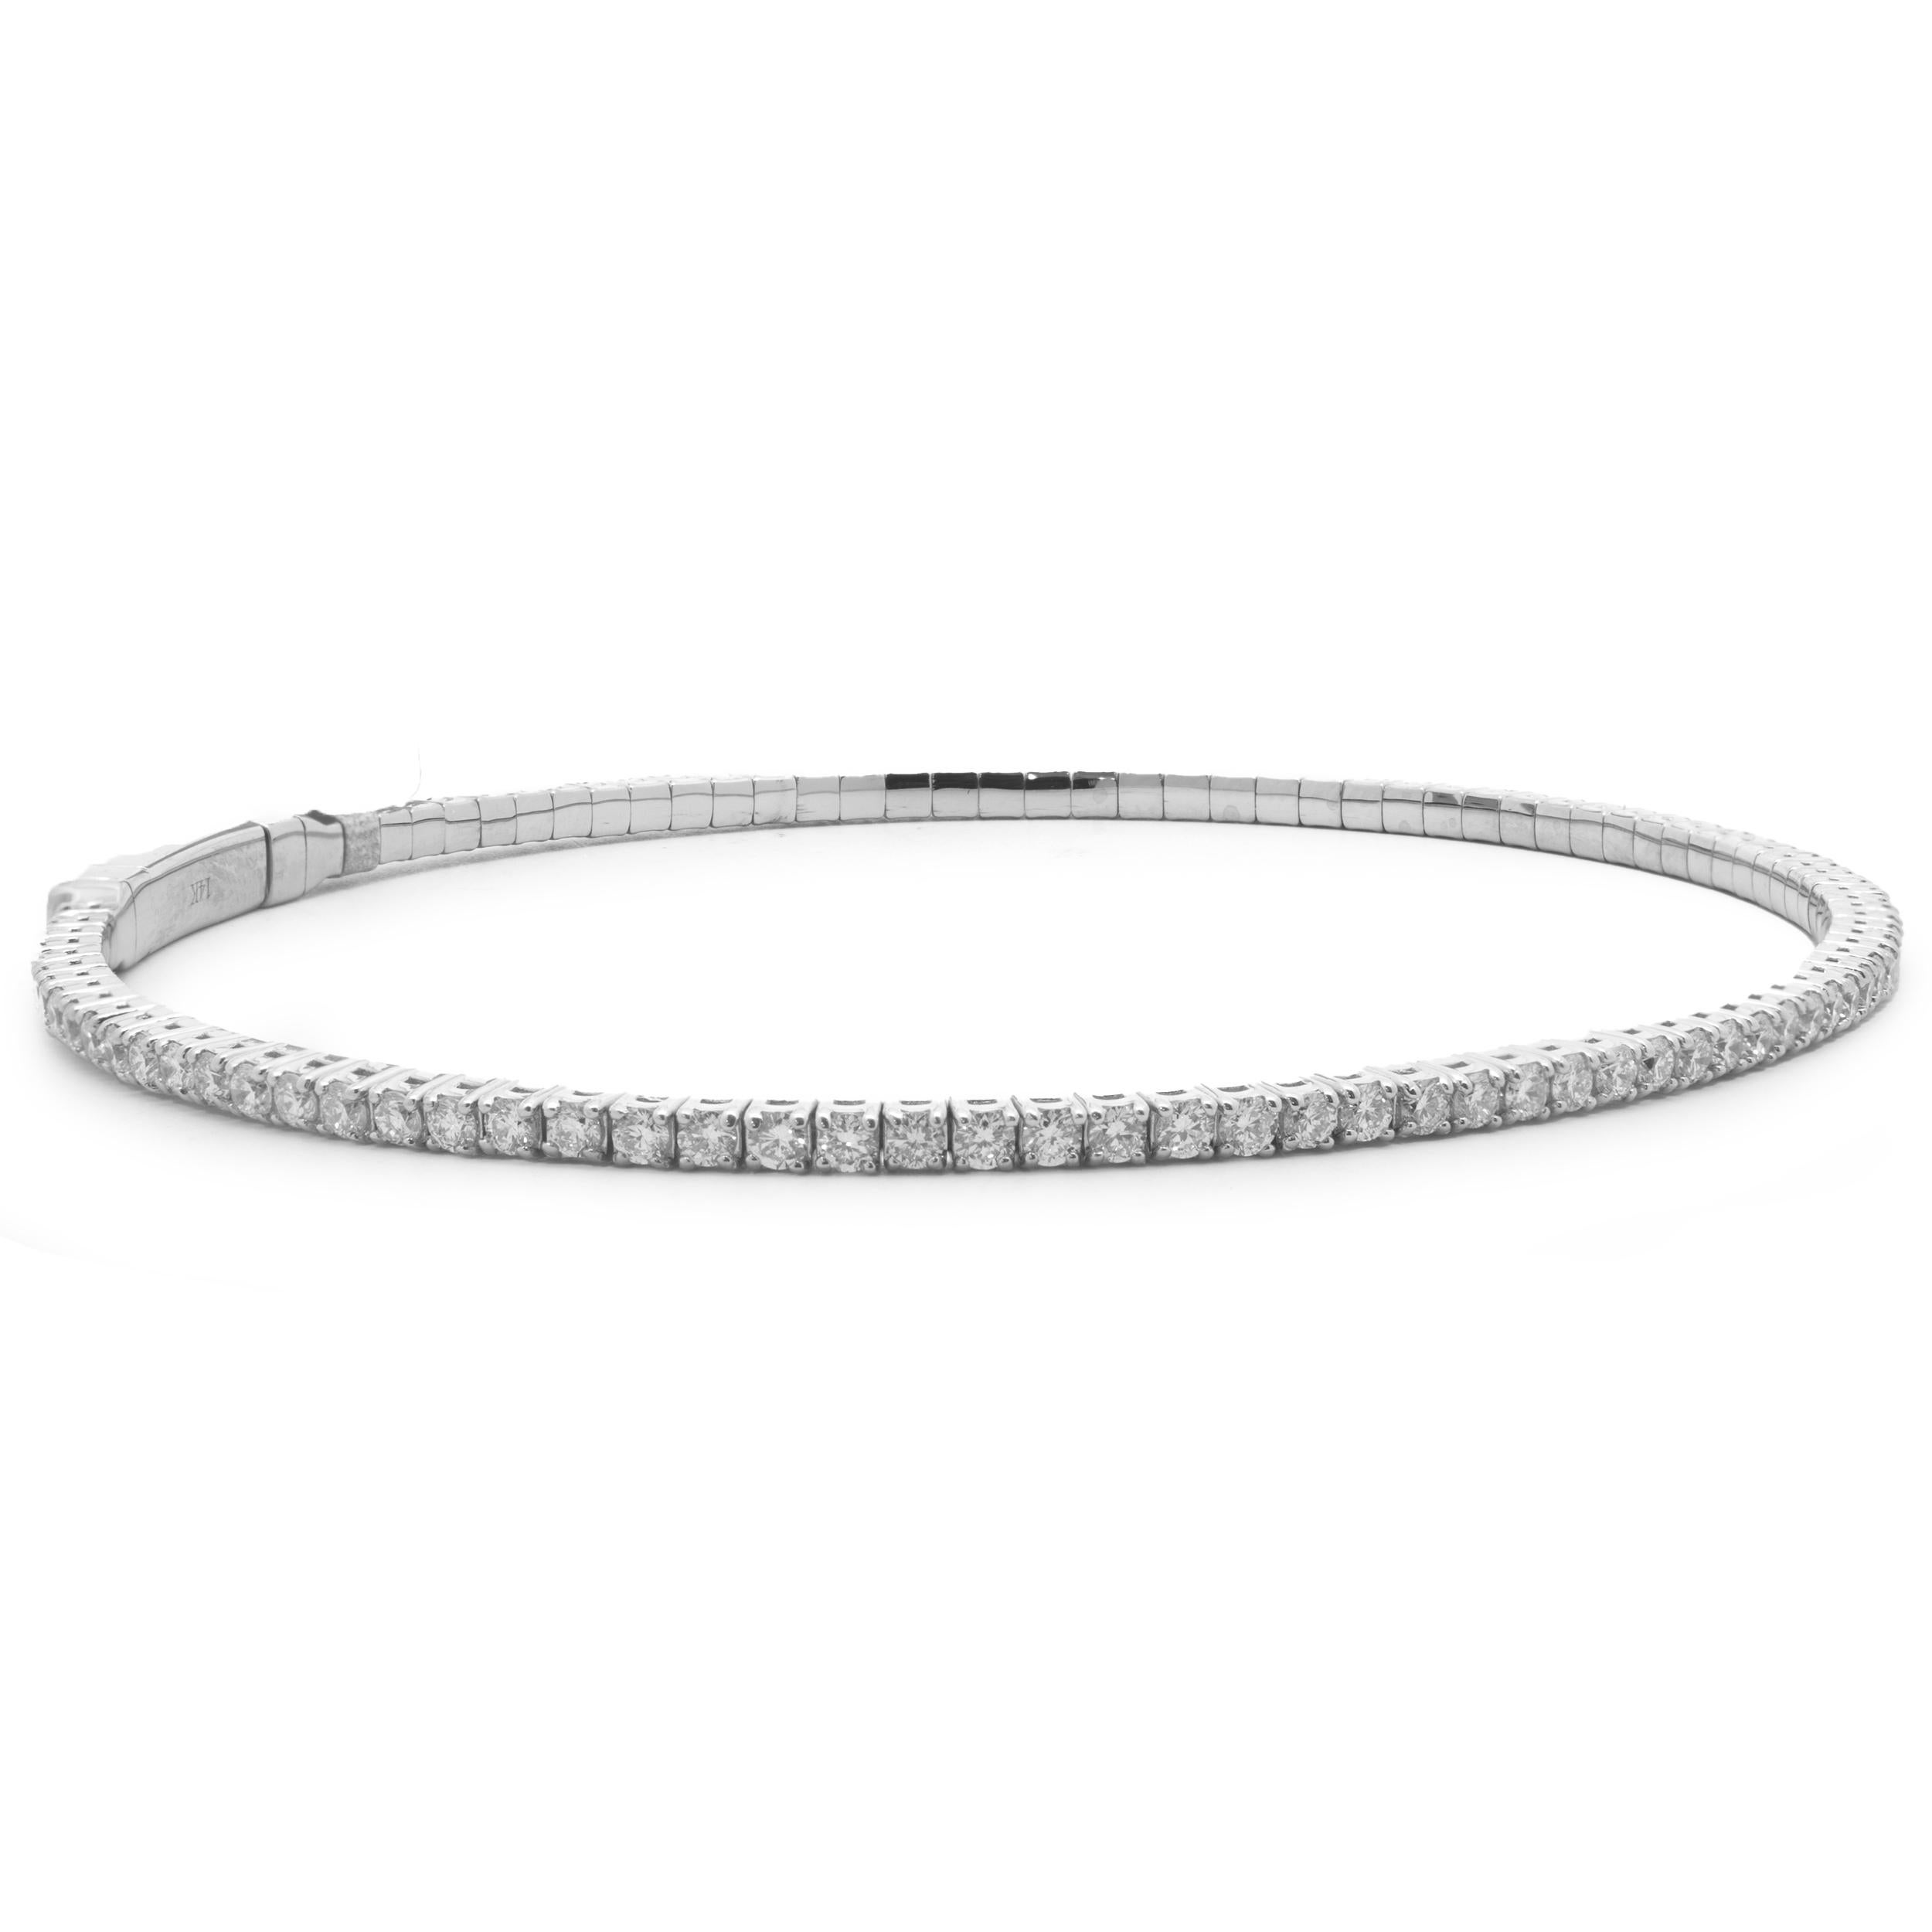 Designer: custom
Material: 18K white gold
Diamonds: round brilliant cut = 1.75cttw
Color: F/G
Clarity: SI1
Dimensions: bracelet will fit up to an 7-inch wrist
Weight: 6.84 grams
